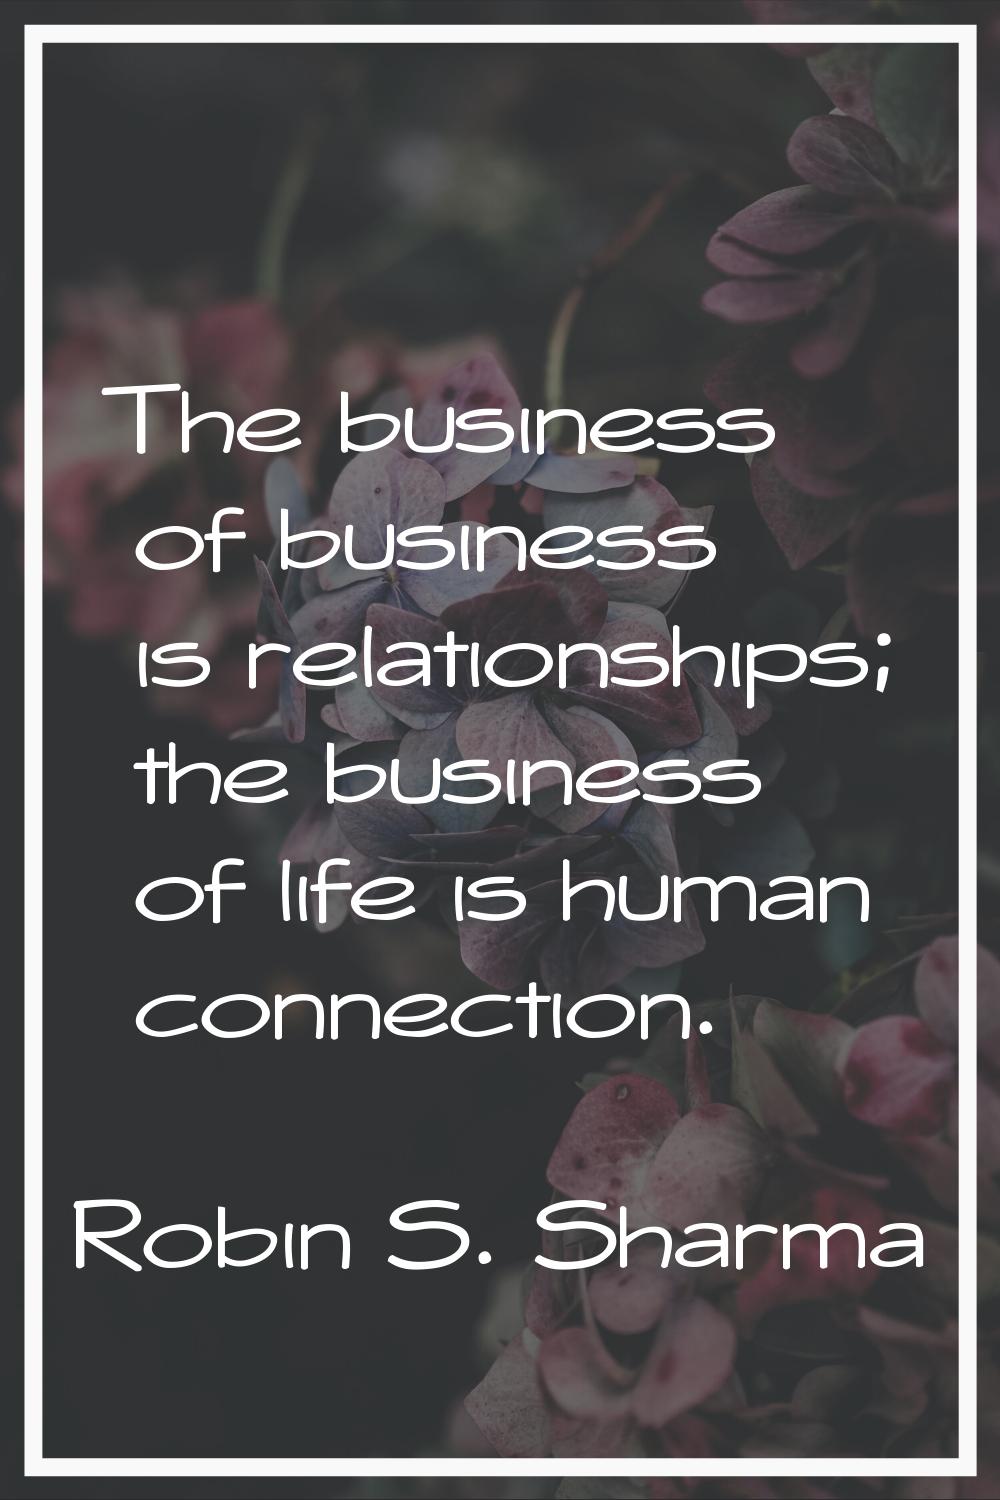 The business of business is relationships; the business of life is human connection.